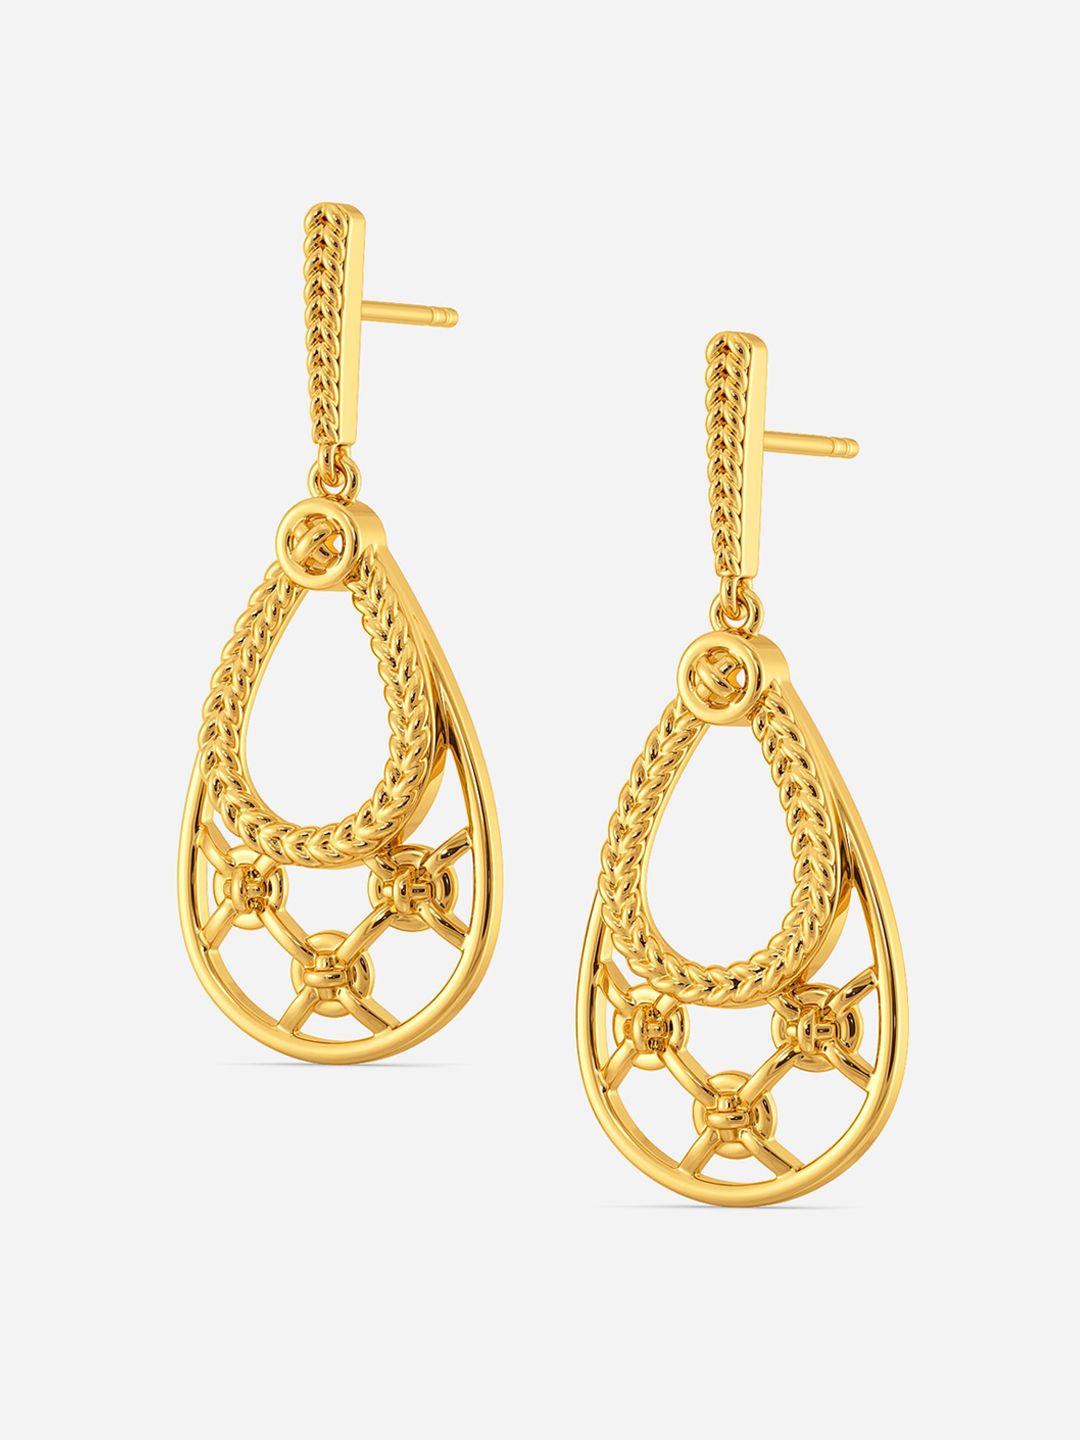 Buy Melorra MELORRA Forget Me Knot 18KT Gold Earrings  684 gm at Redfynd